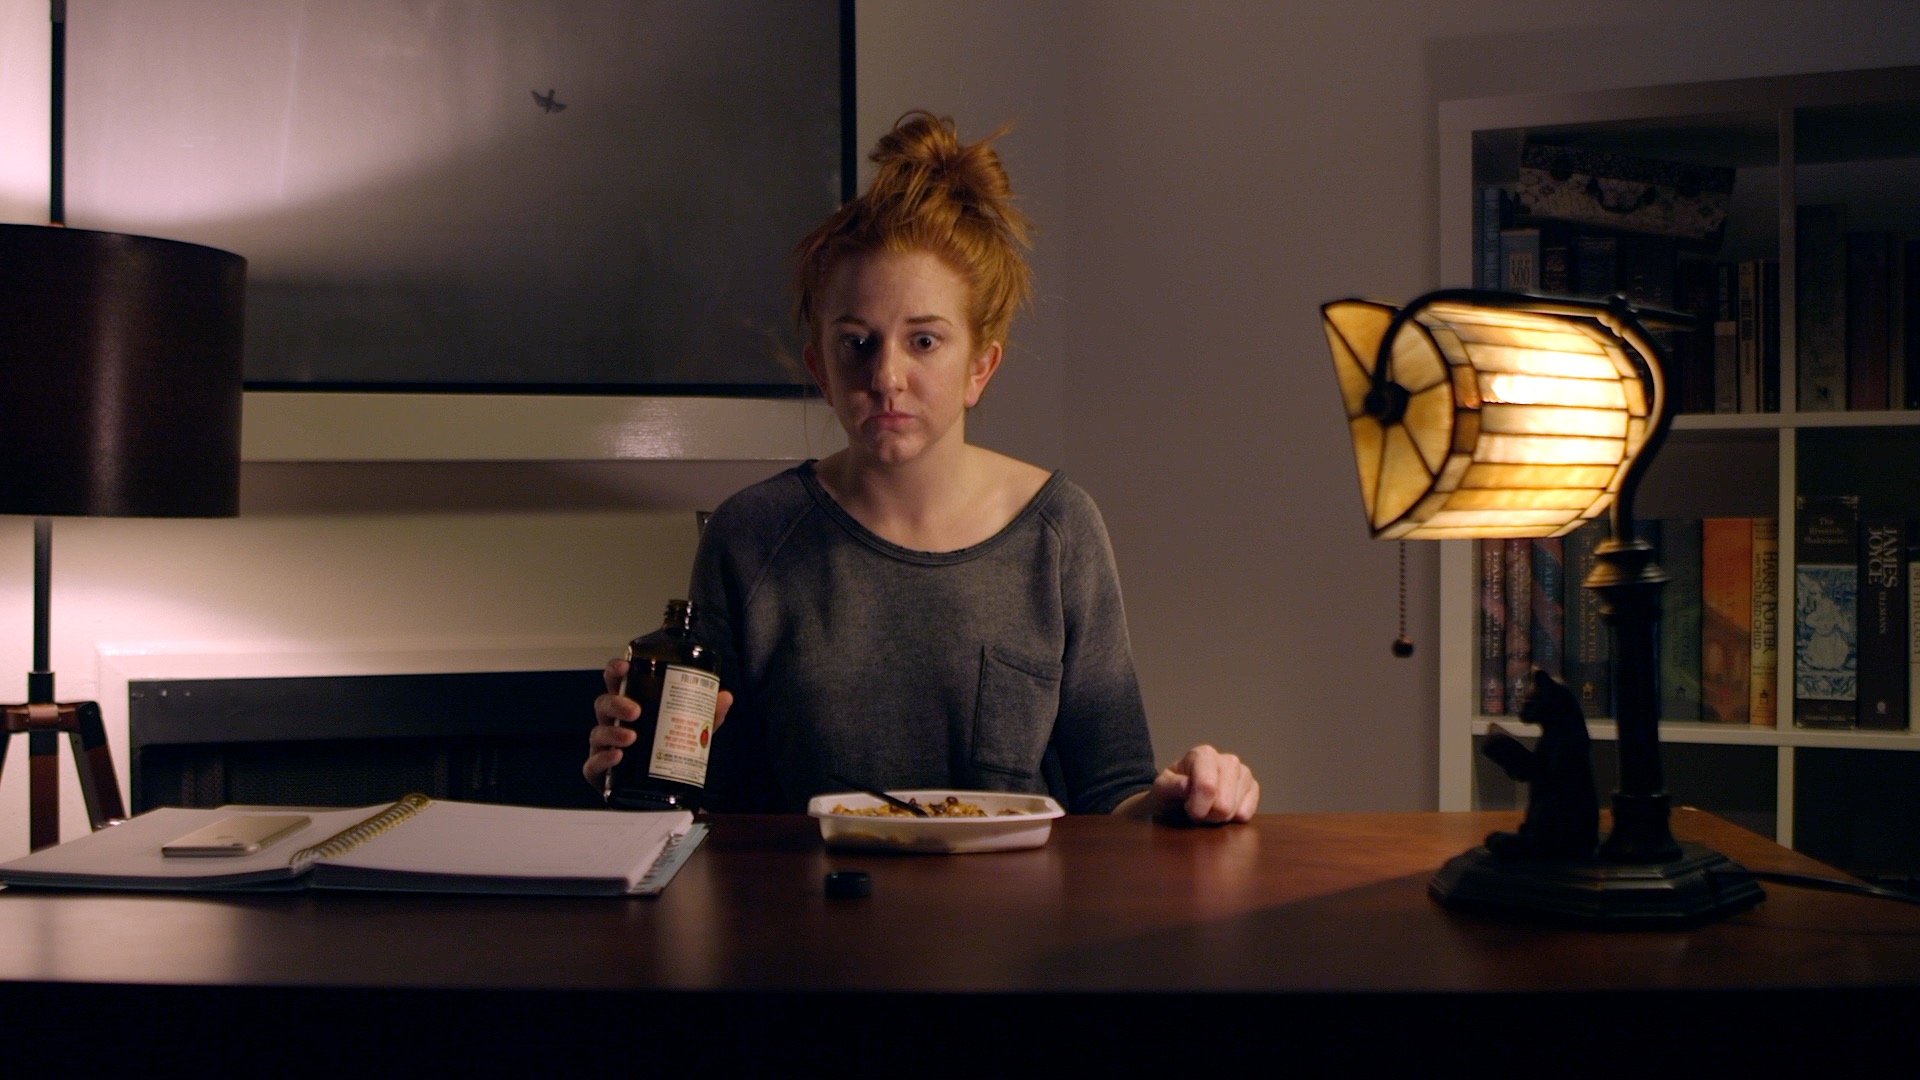 A redhaired woman with her head in a messy bun sits at a desk staring blankly ahead.